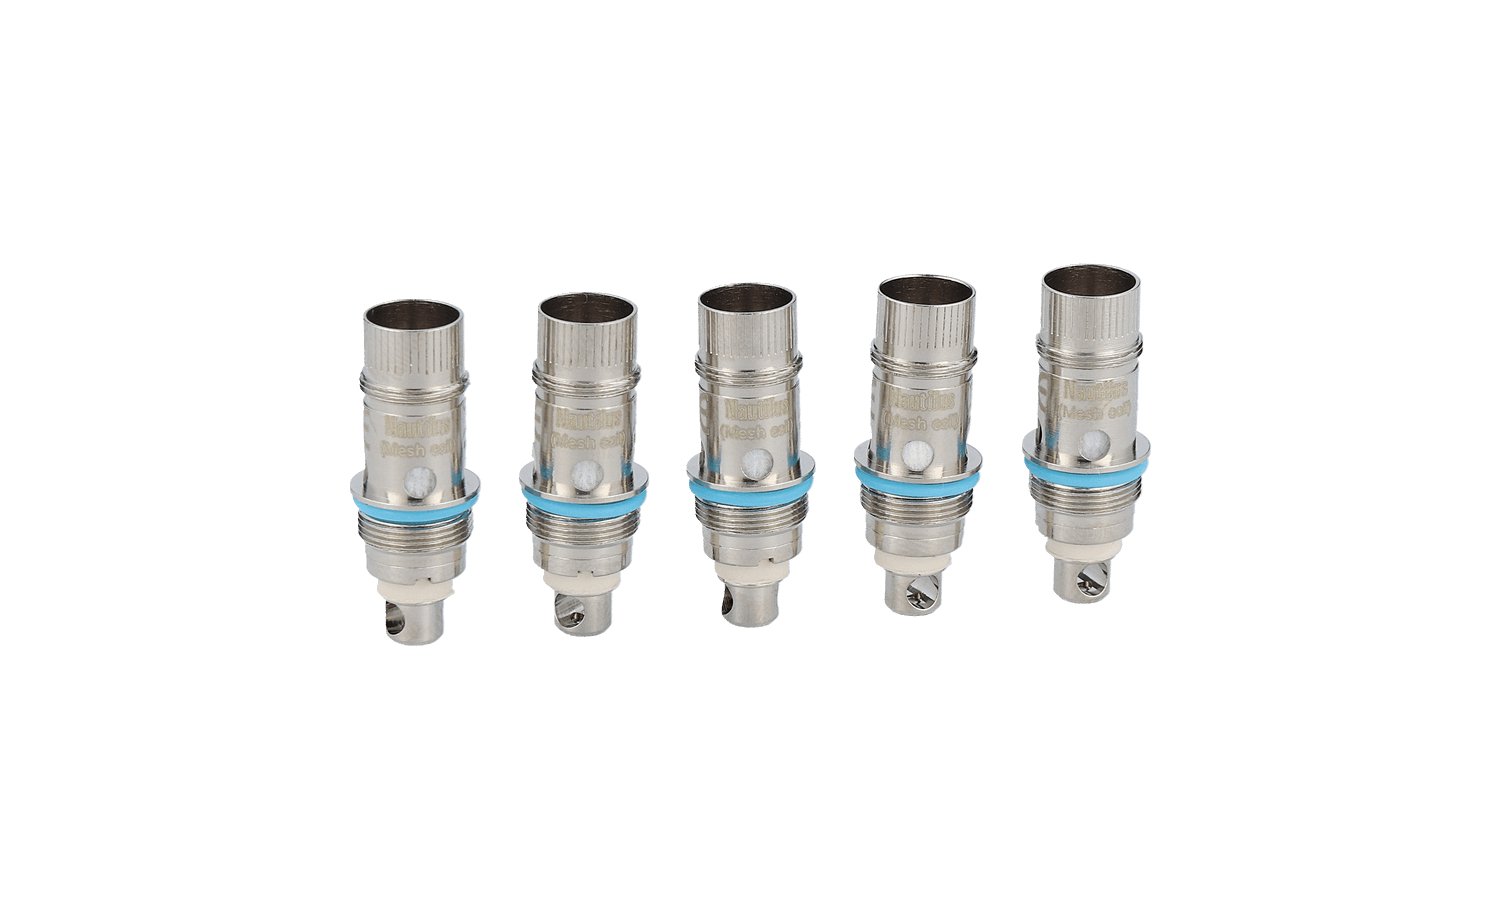 Aspire - Nautilus - Mesh Heads 1,0 Ohm (5 Stück pro Packung) - 1er Packung 1,0 Ohm - Vapes4you